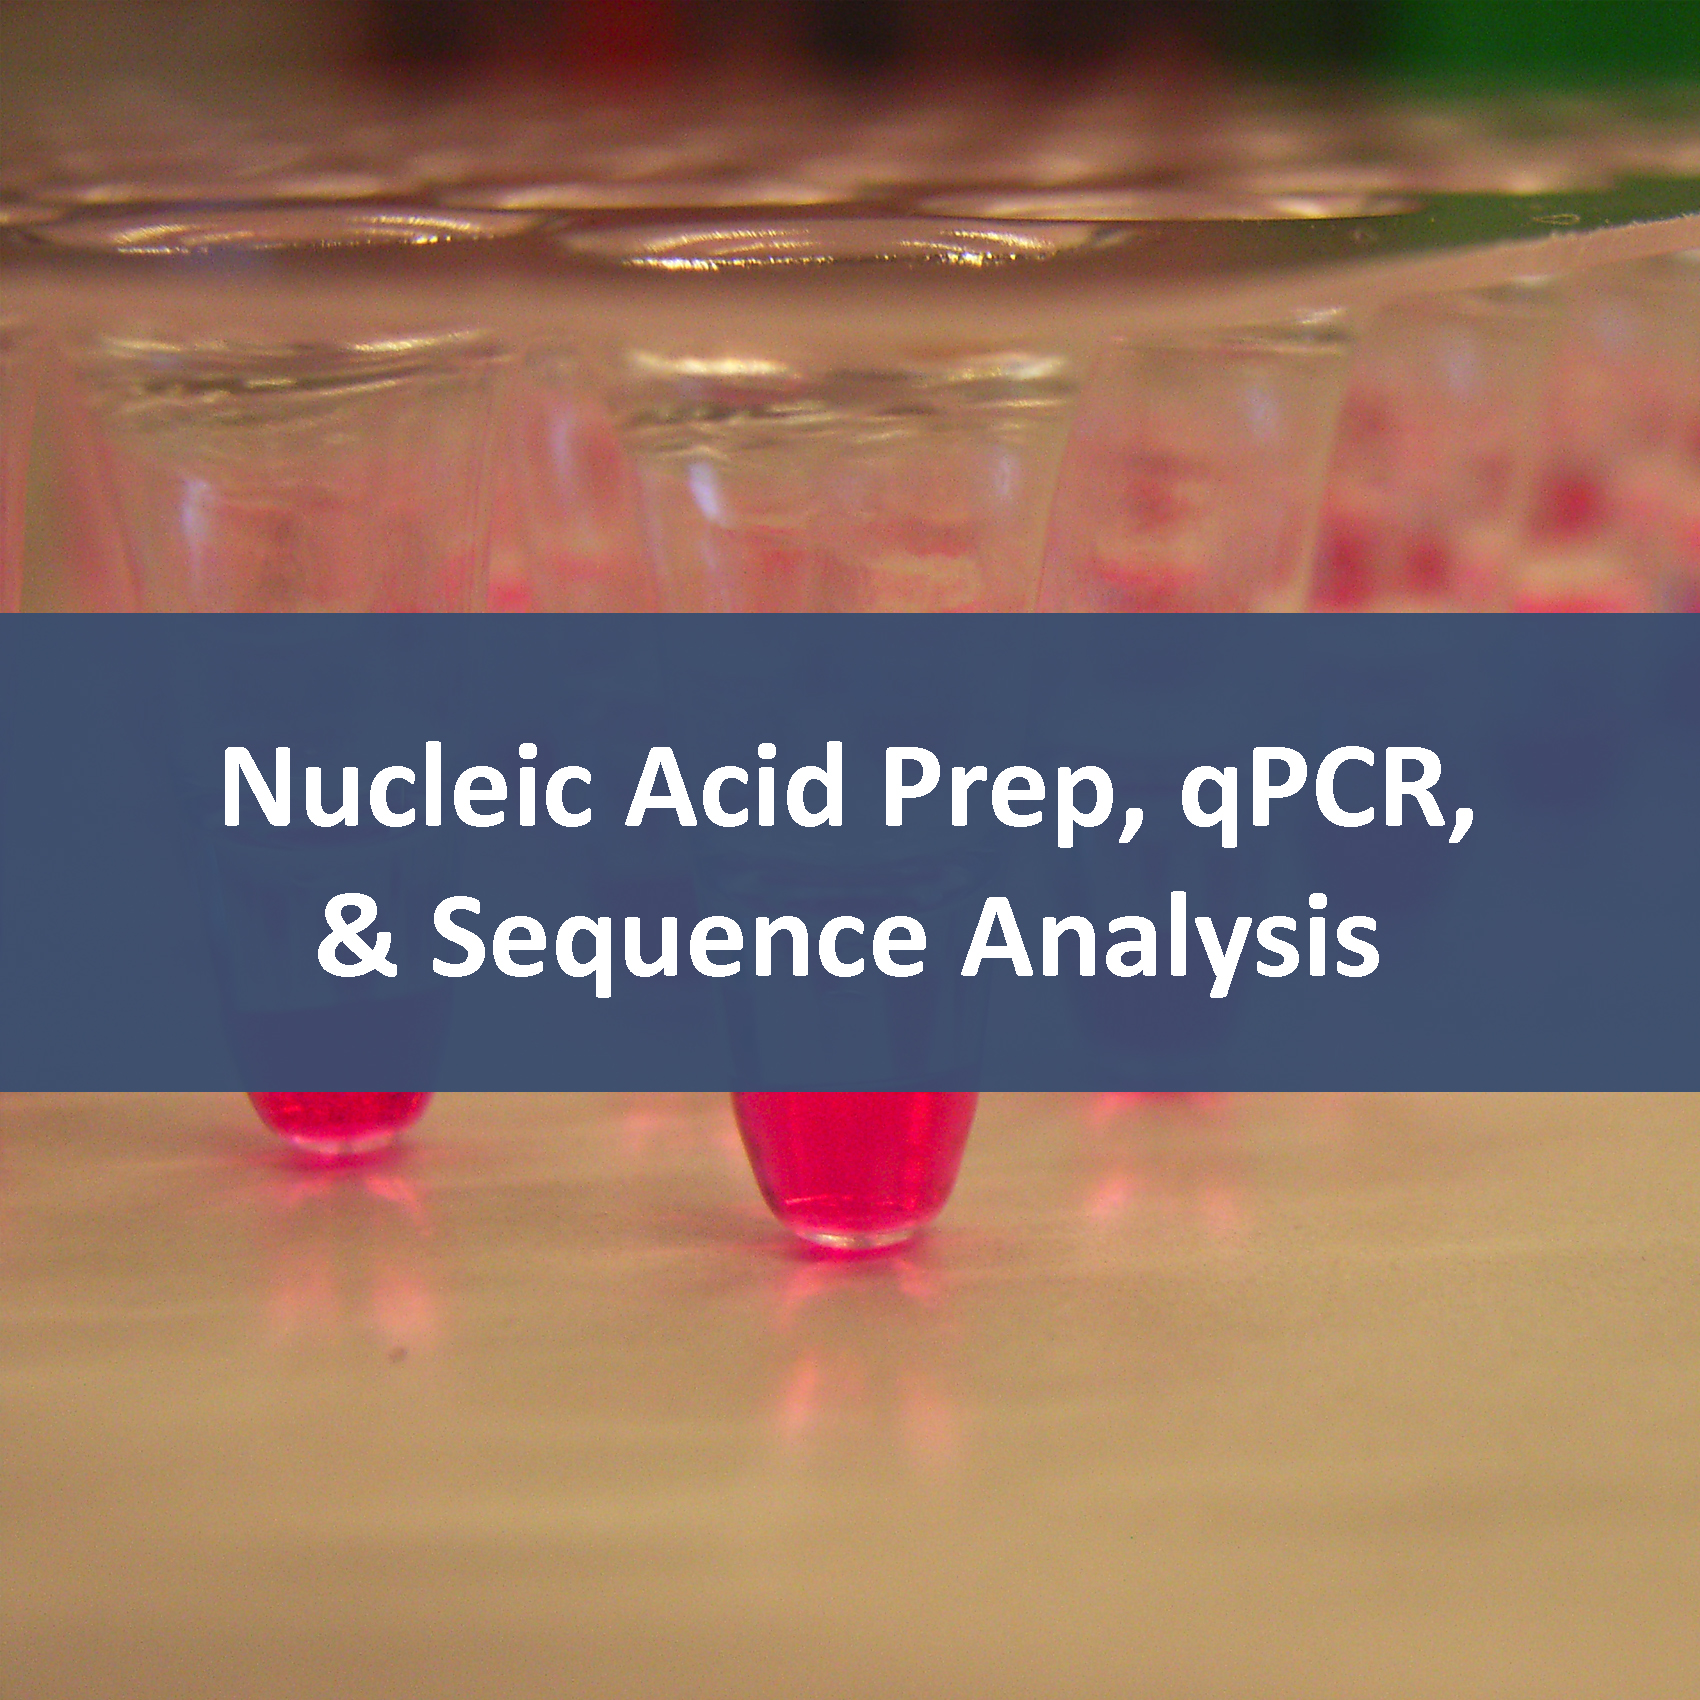 Nucleic Acid Shearing, QPCR & Sequence Analysis